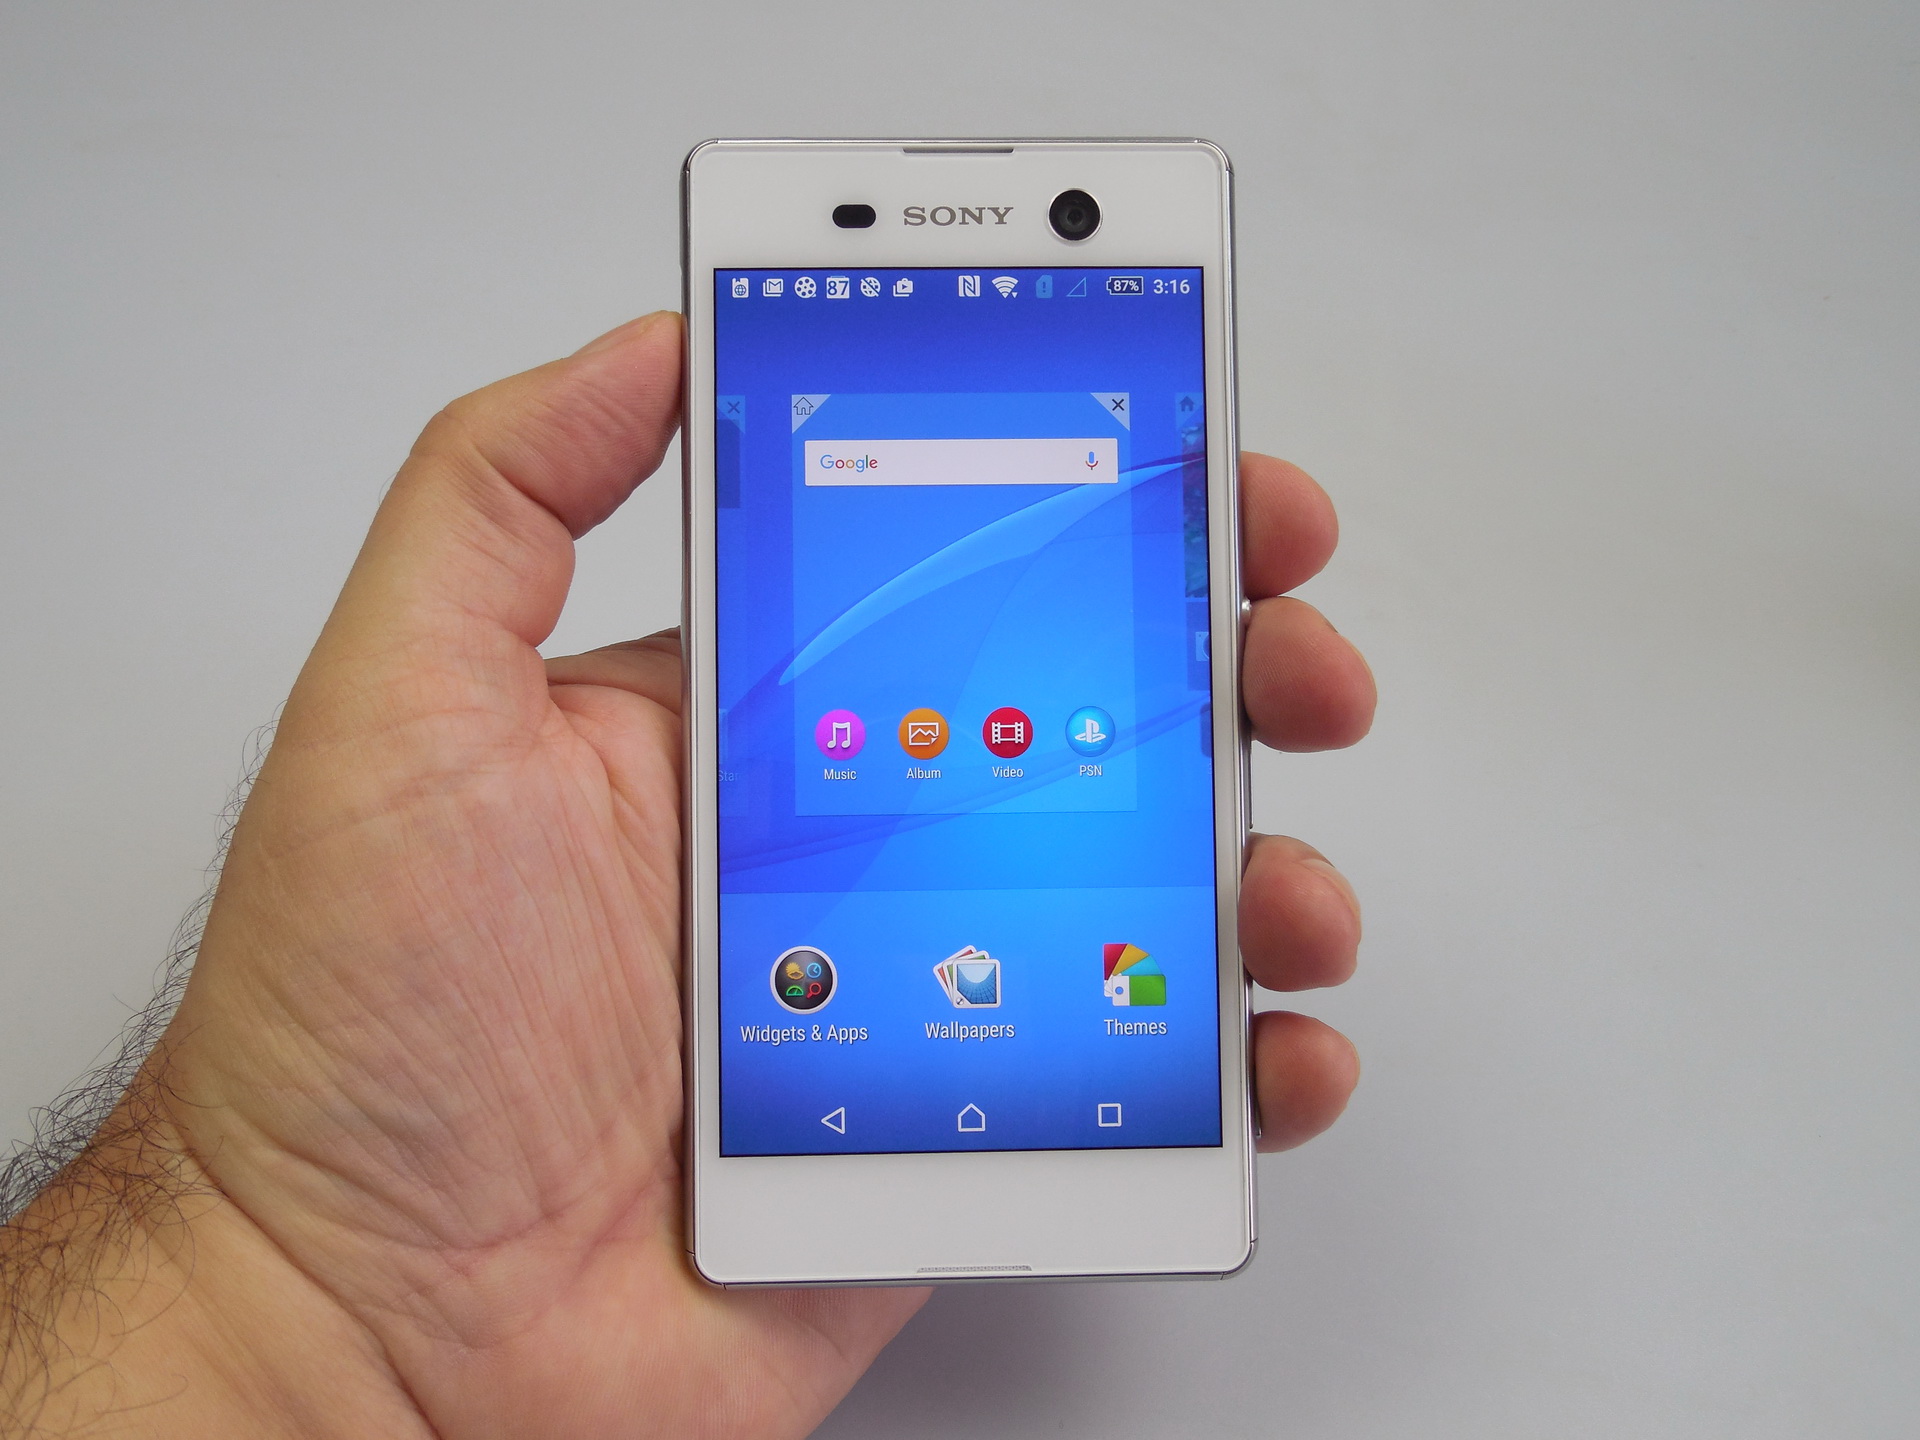 vlinder Mathis kennis Sony Xperia M5 Dual Review: New Fangled Cameraphone They Said... Still  Good, But Not THAT Good (Video) | GSMDome.com